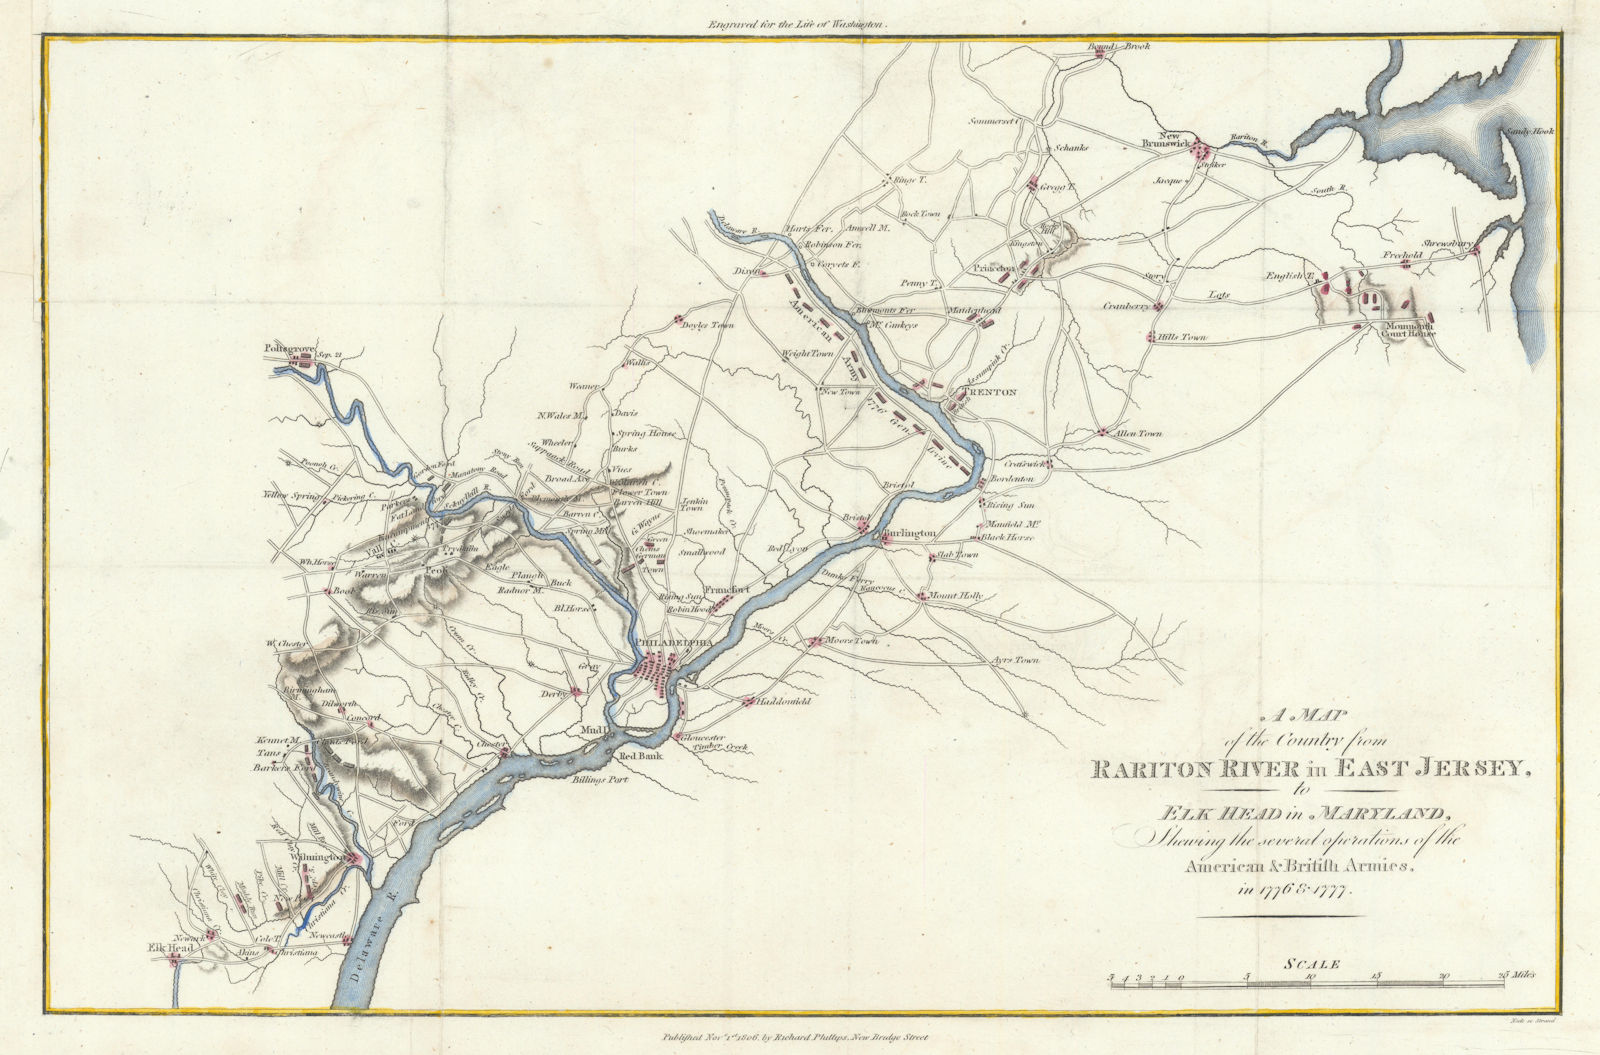 Associate Product The Country from Rariton River… American & British Armies in 1776 1805 old map